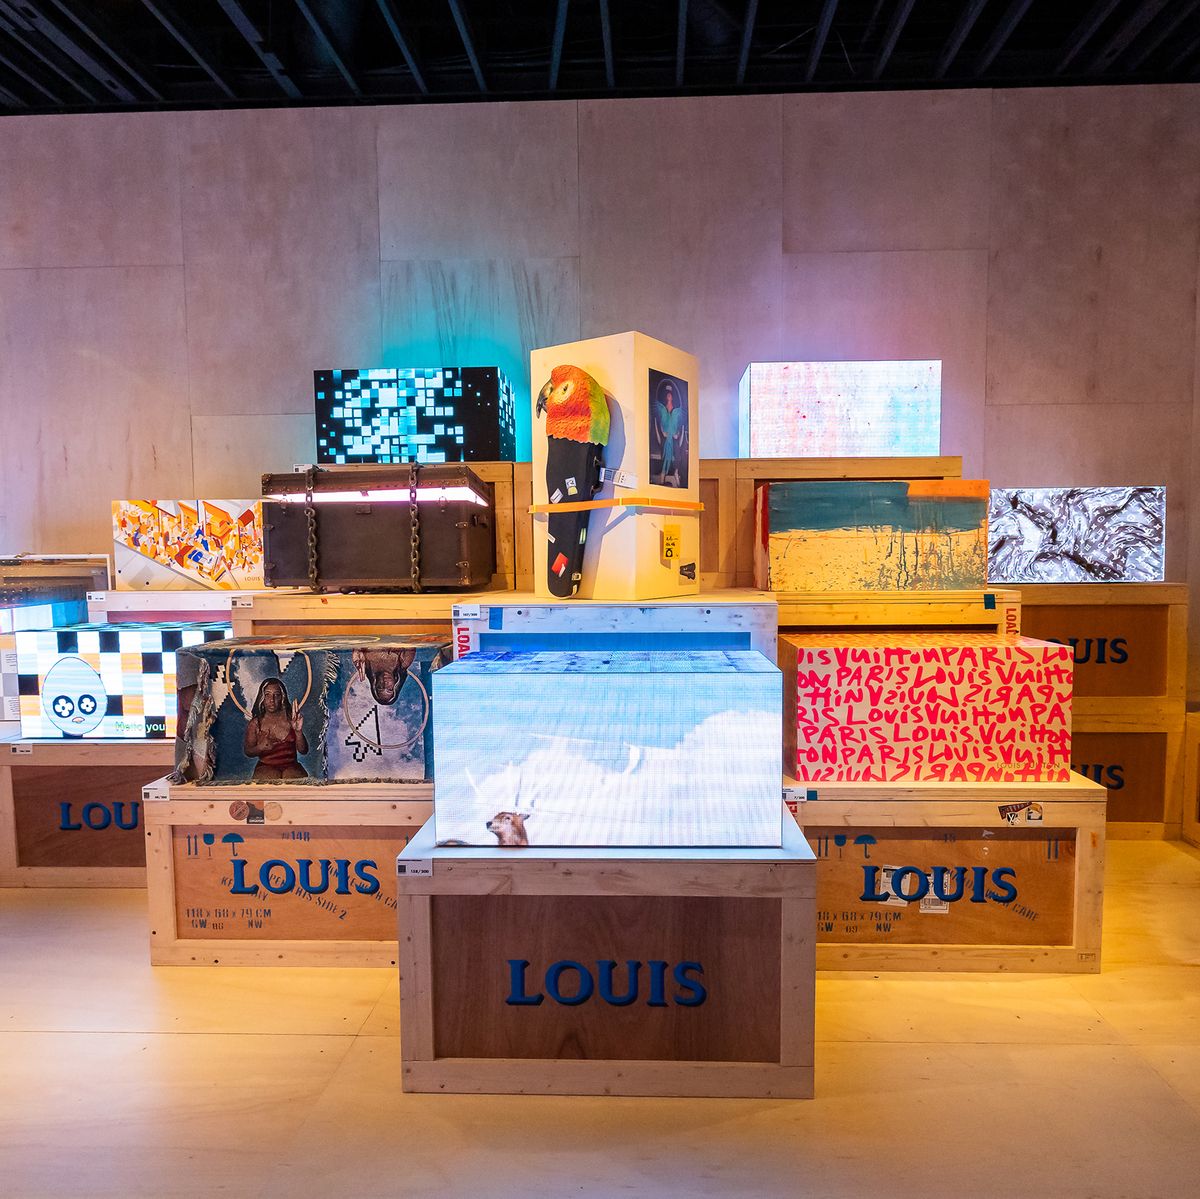 Louis Vuitton turns 200: These are the luxury fashion house's most